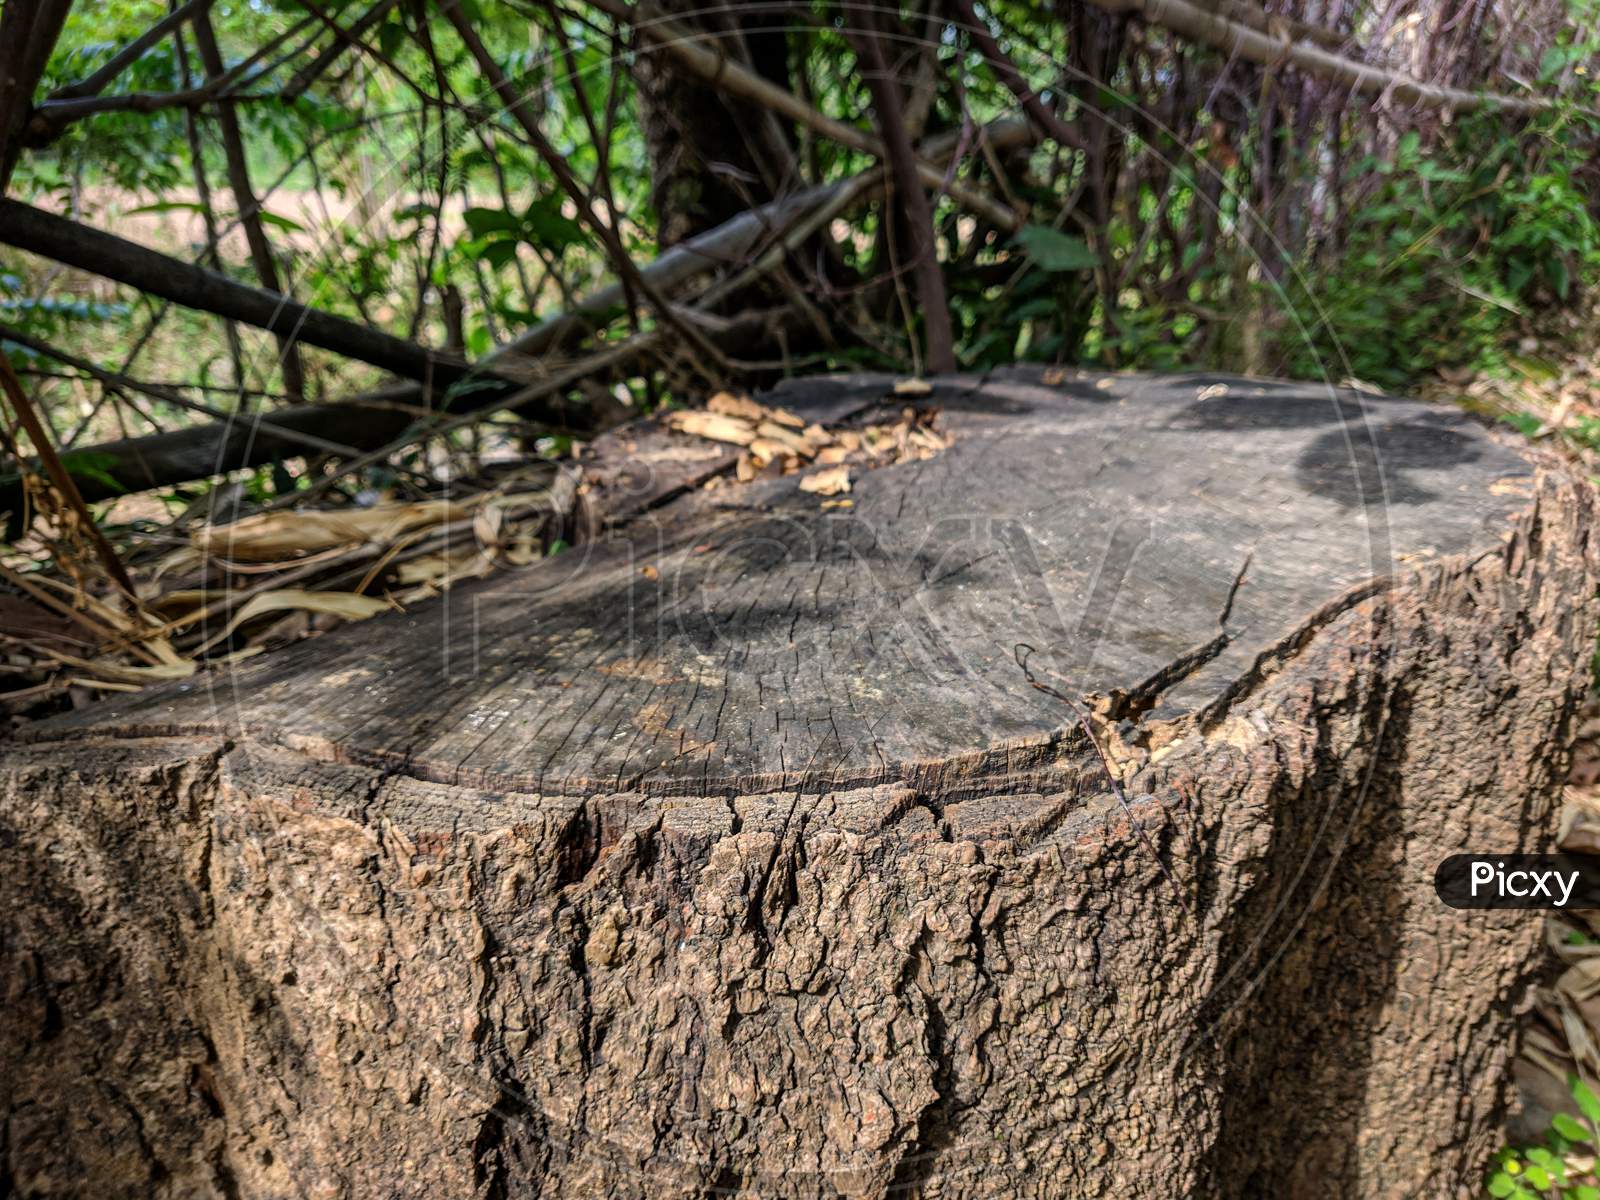 The stump of a tree left after cutting down.